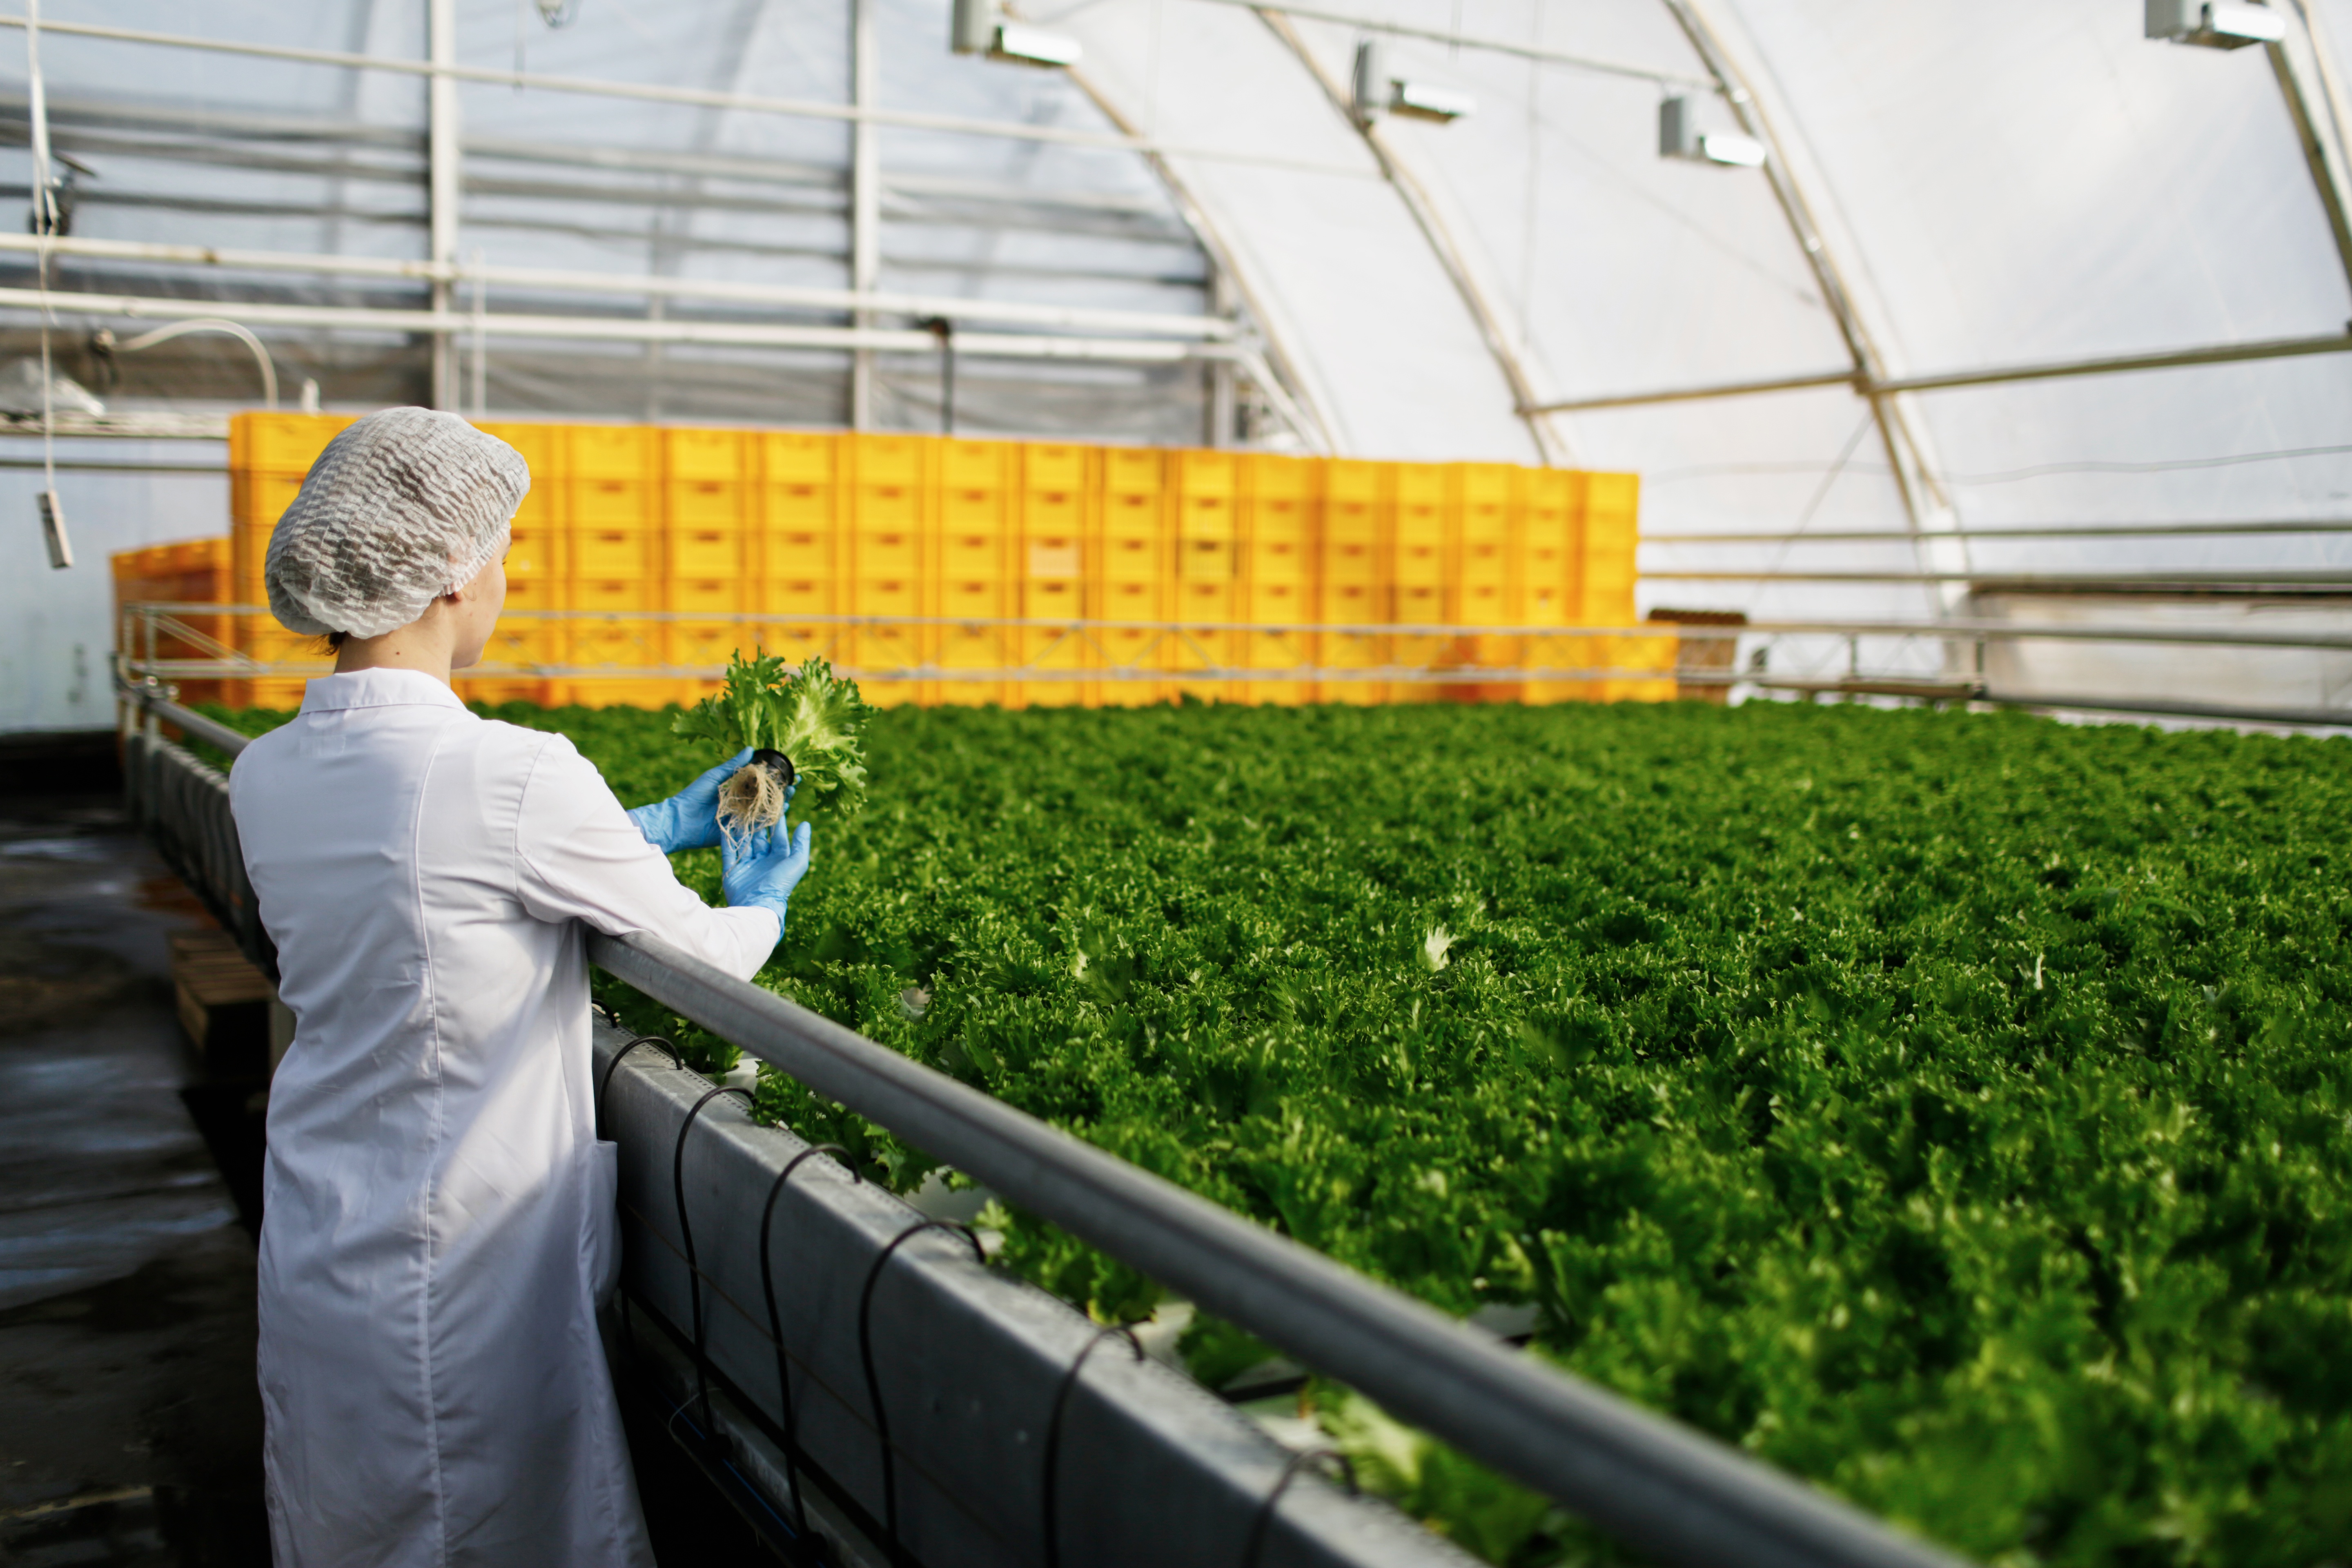 Food safety worker evaluating a plant in a controlled environment